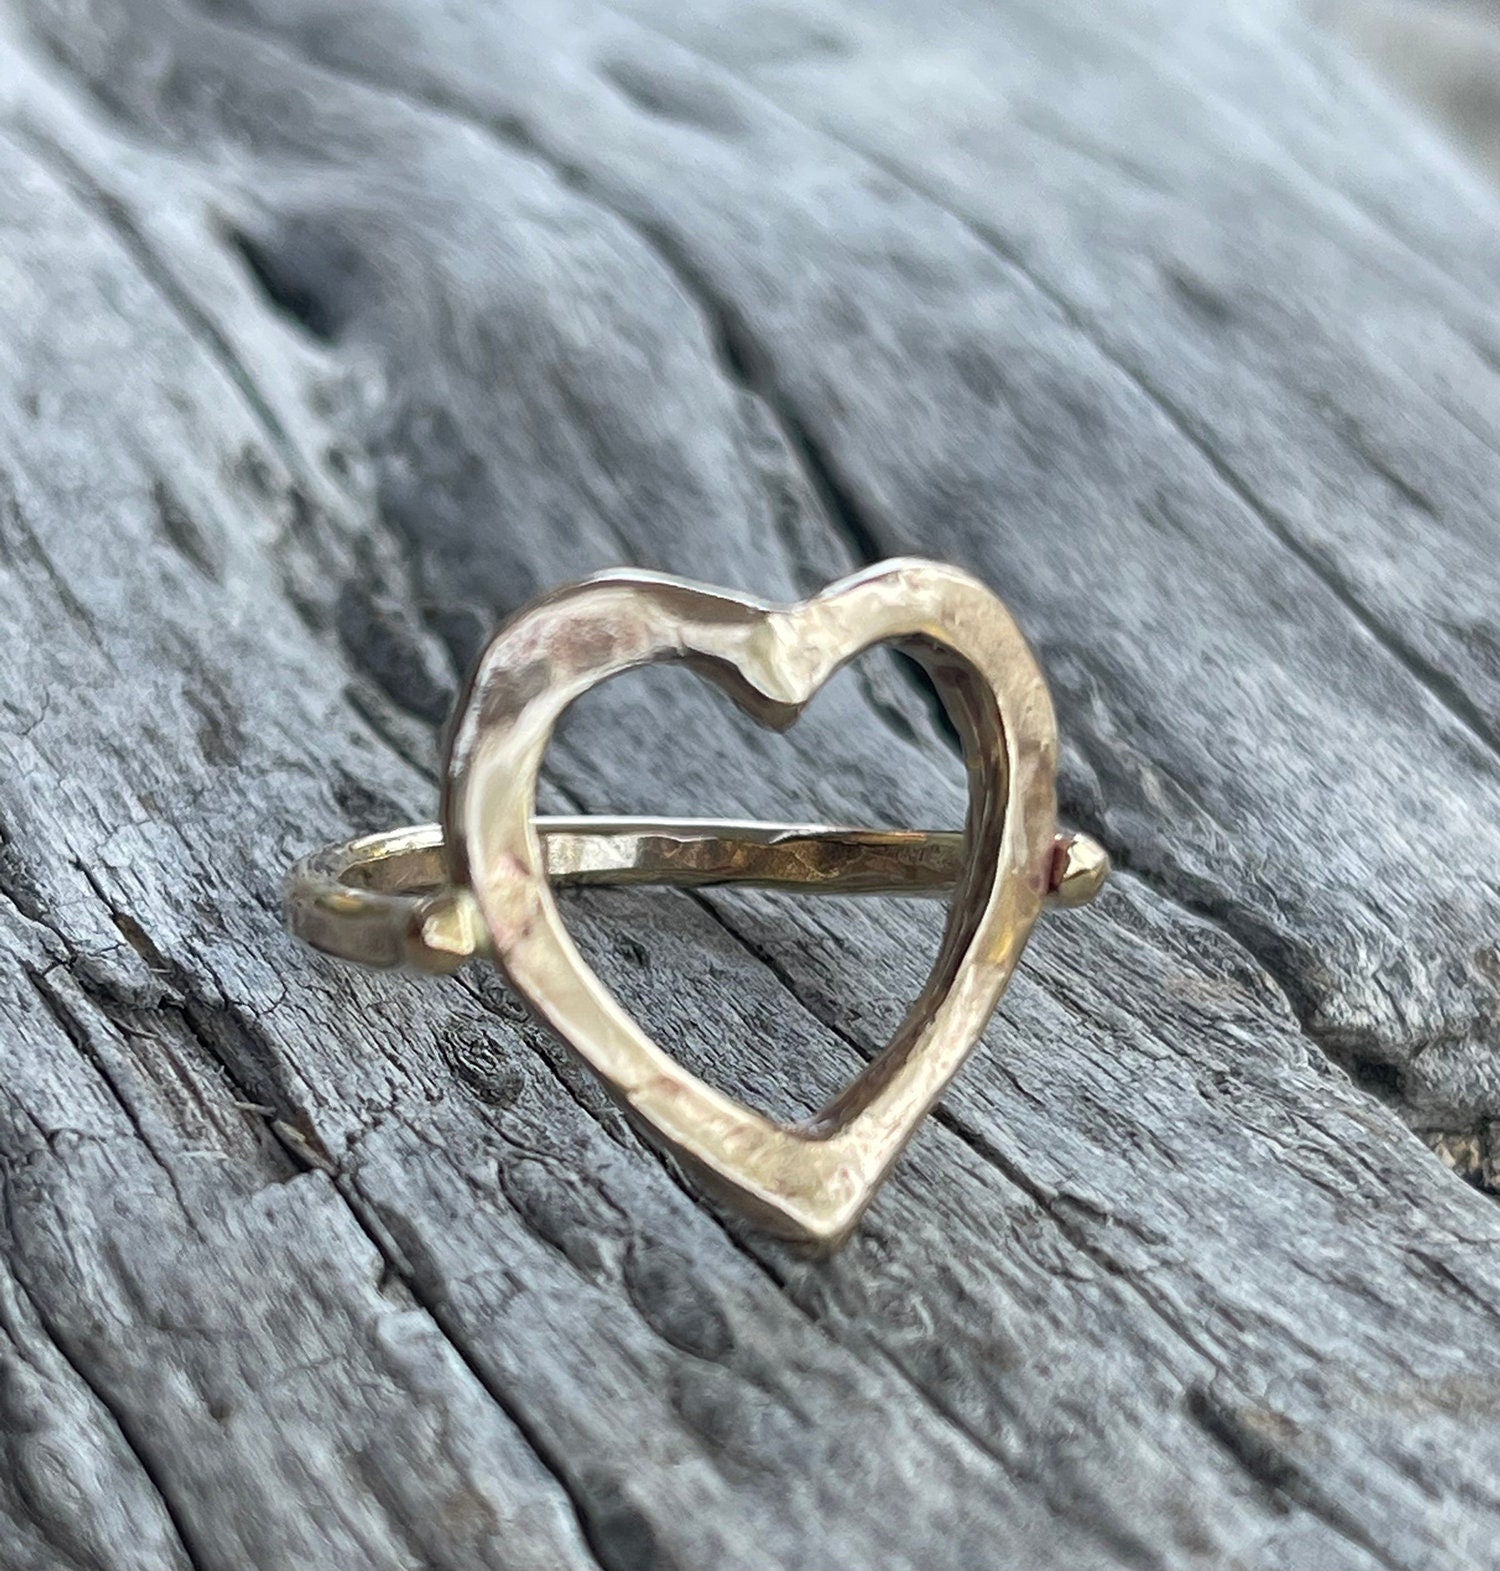 Bronze Heart Ring with 14K Gold Fill Band